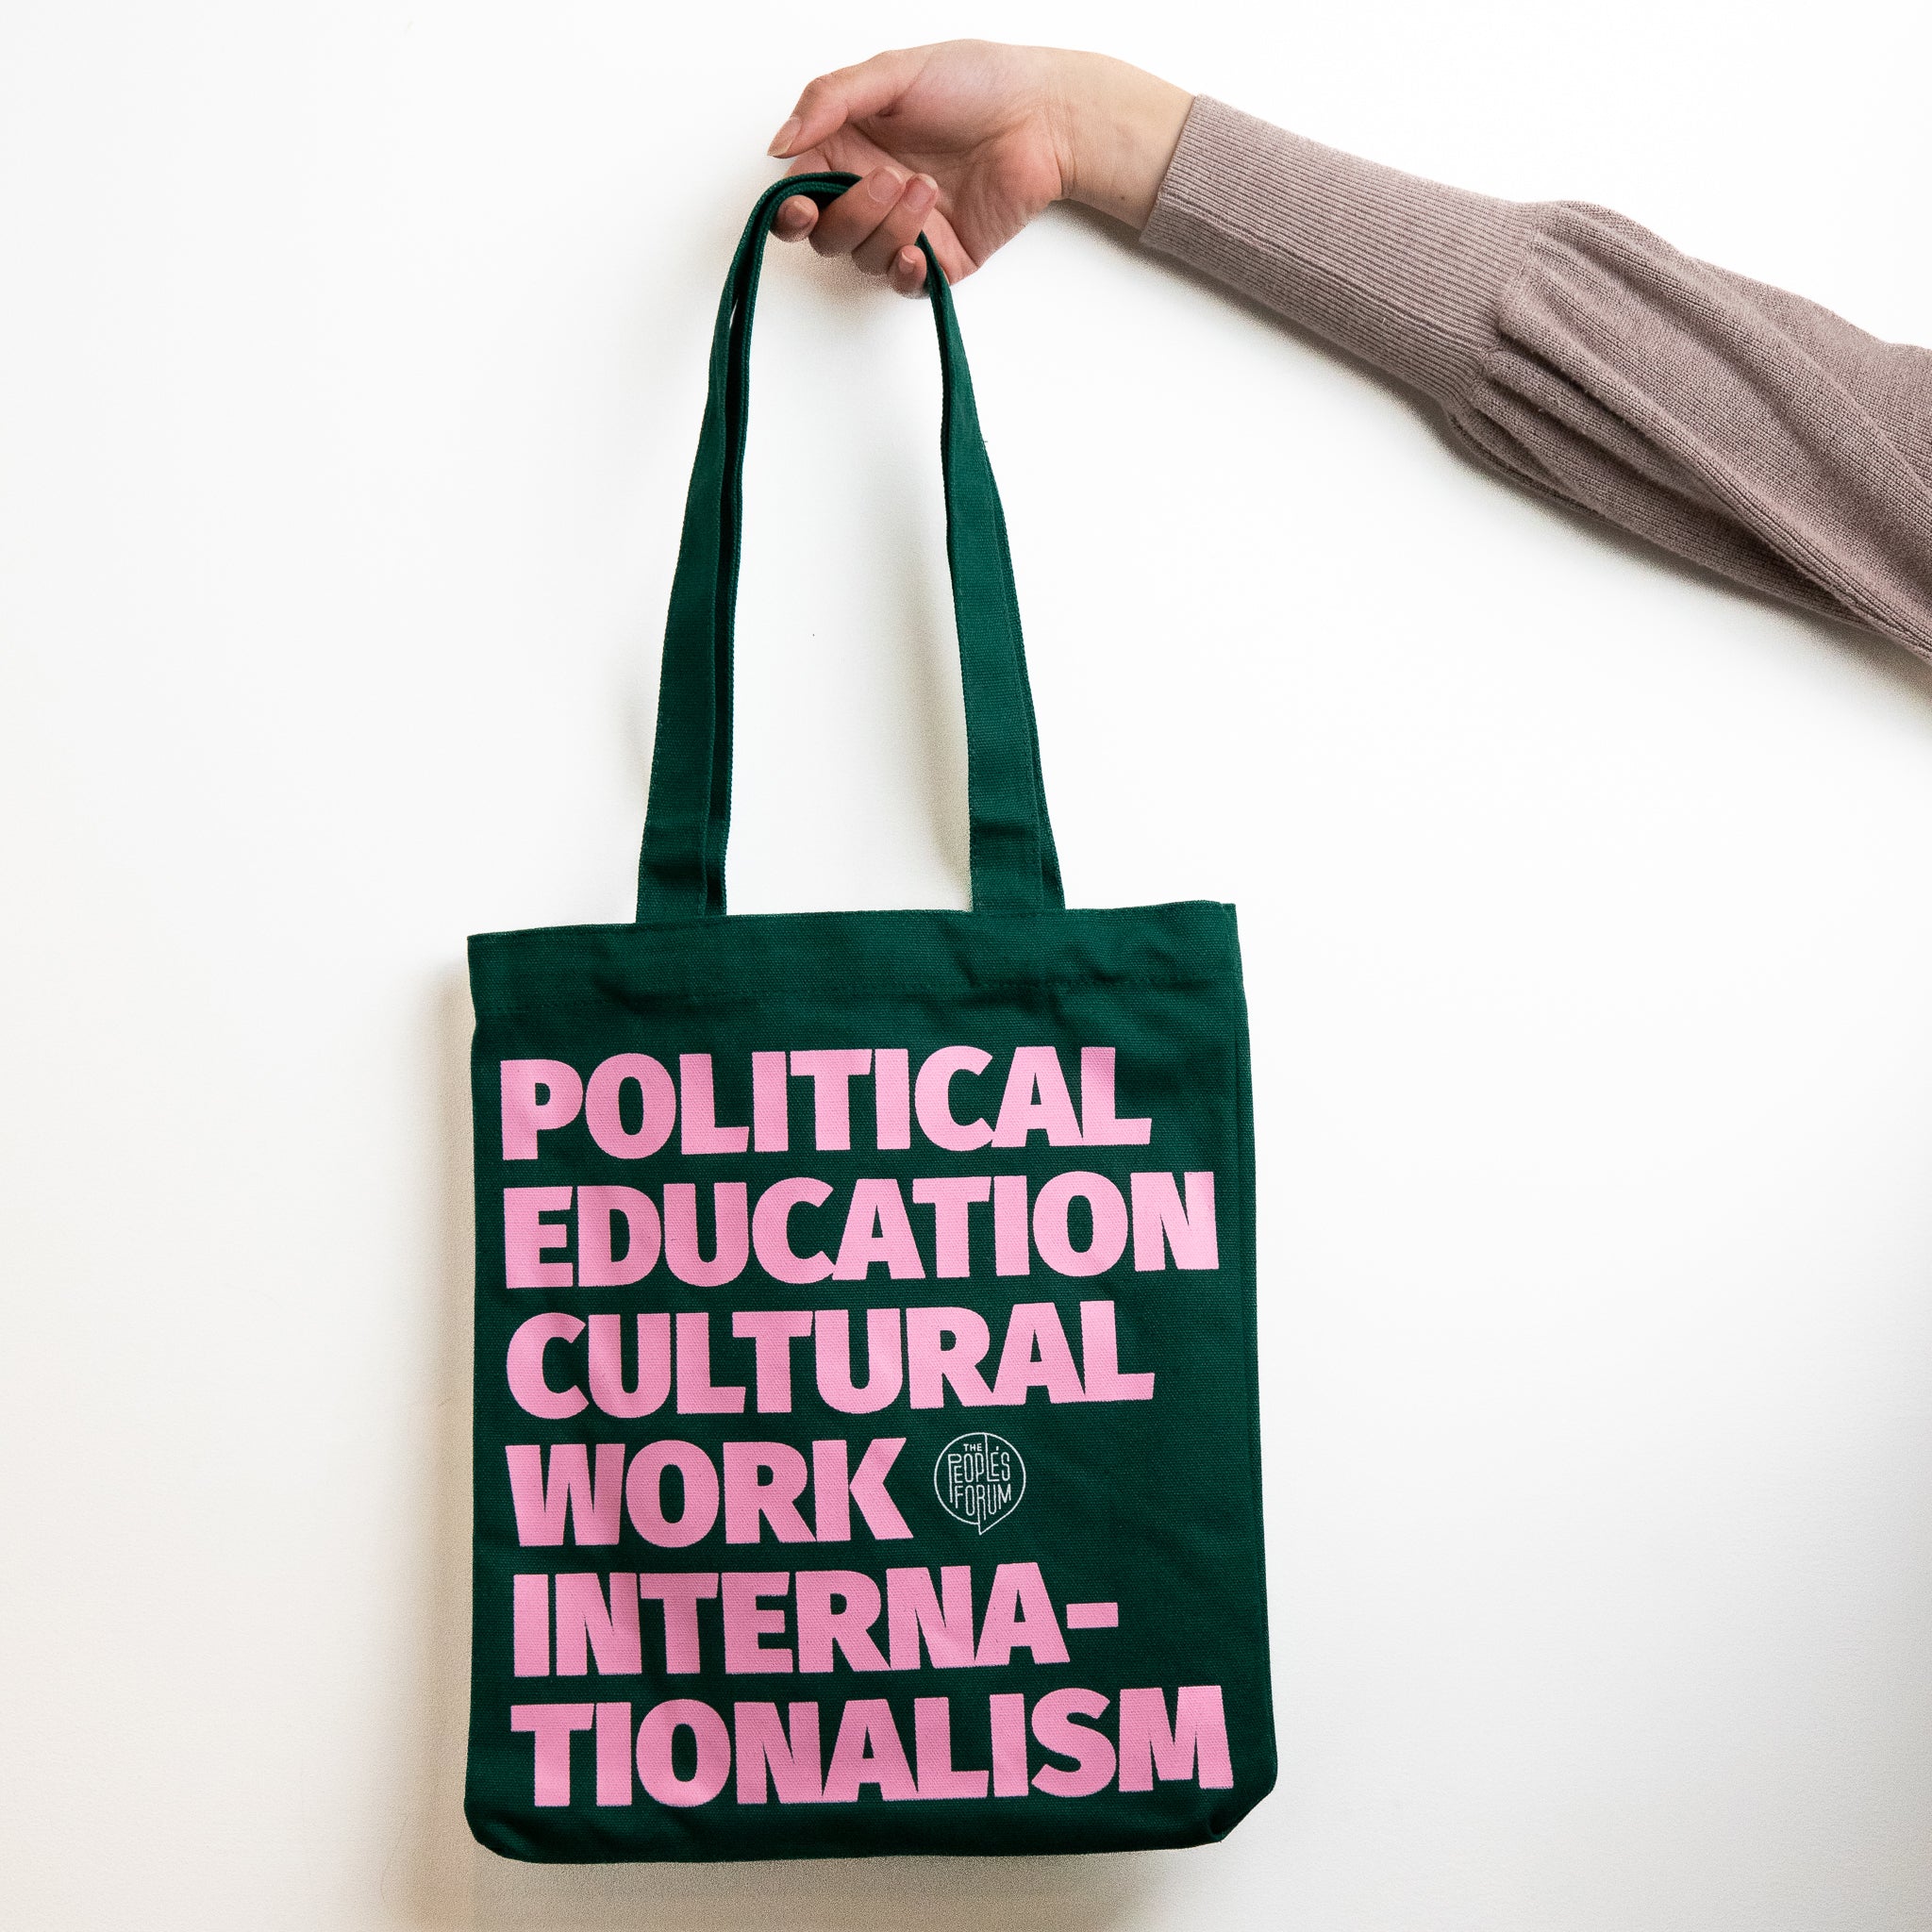 The Statement Tote